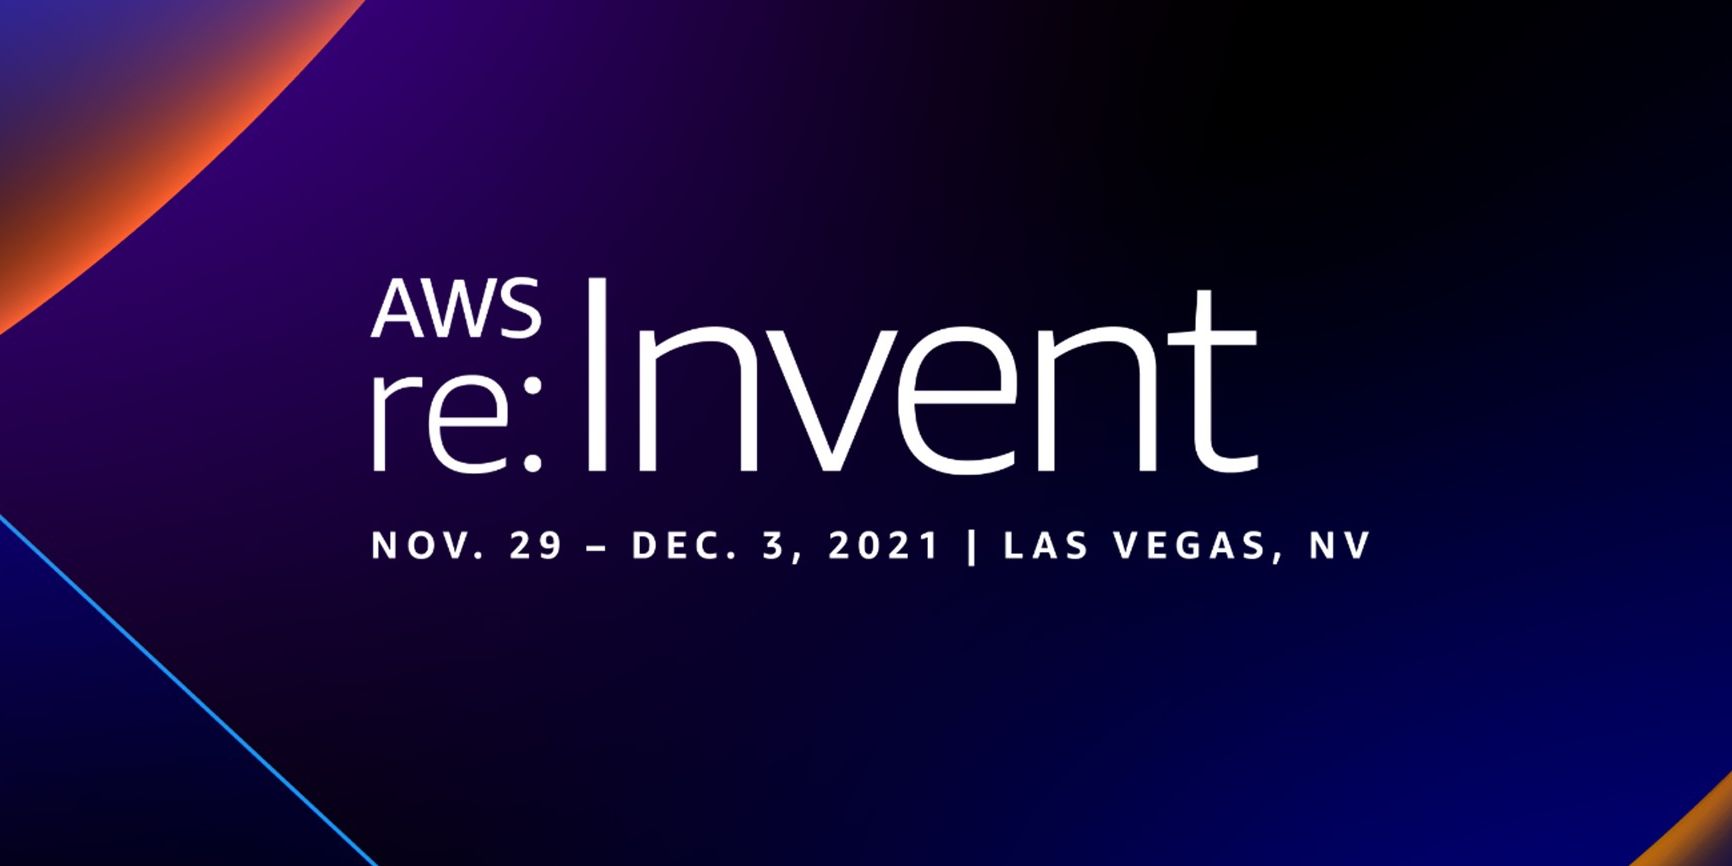 aws-reinvent-logo-featured-image-2021